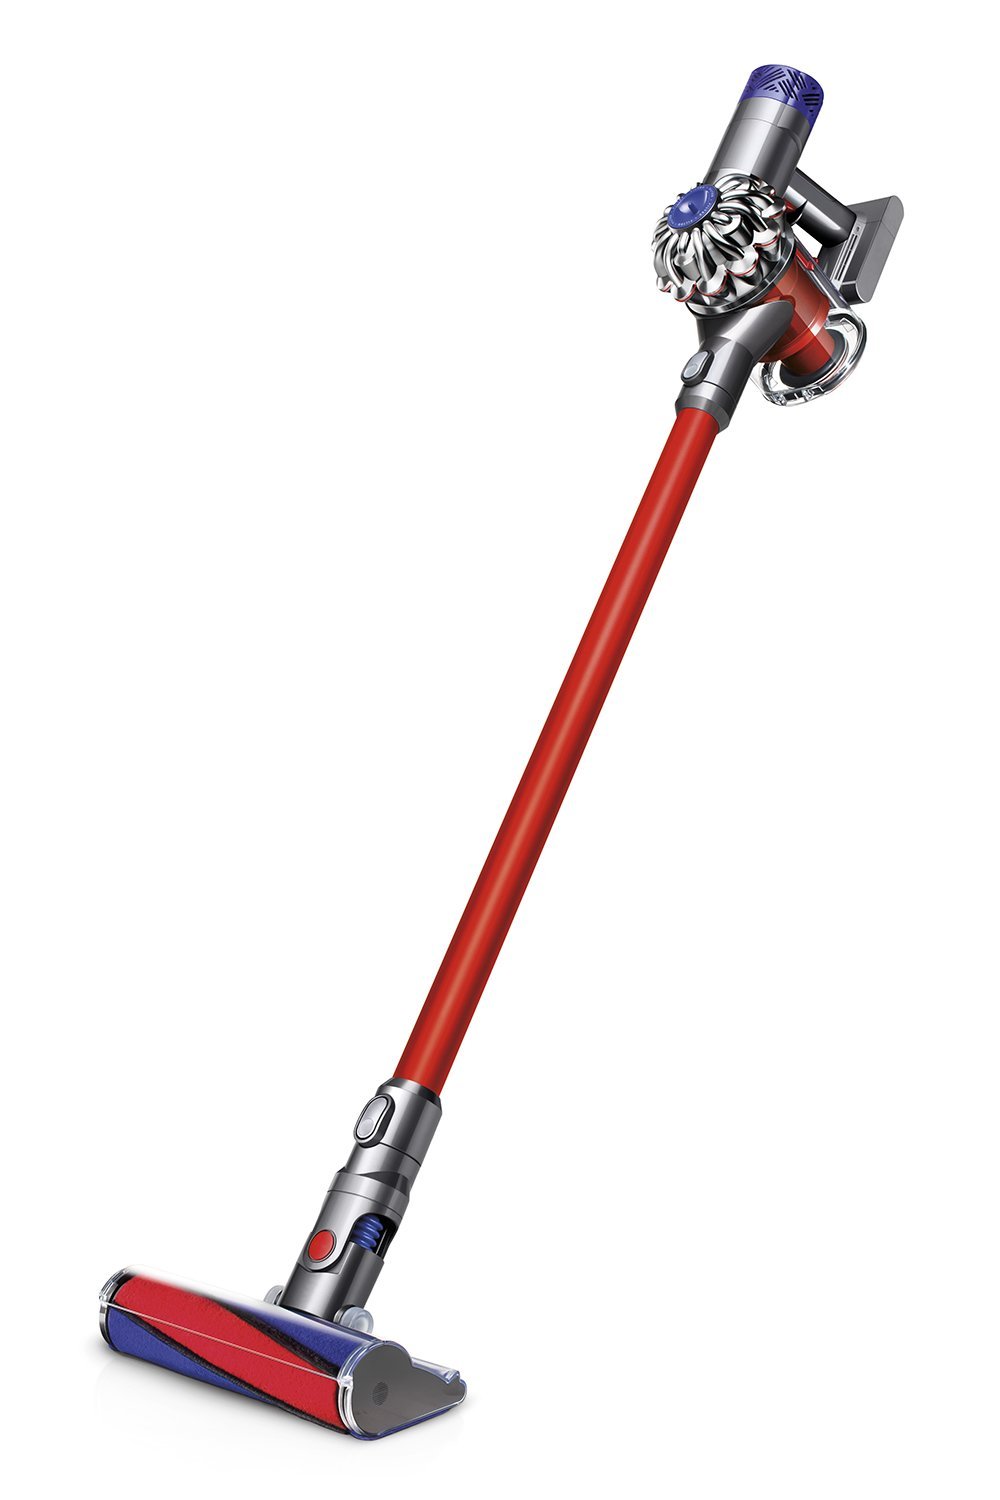 dyson-v6-absolute-vs-dyson-v6-motorhead-all-about-the-features-nerdwallet